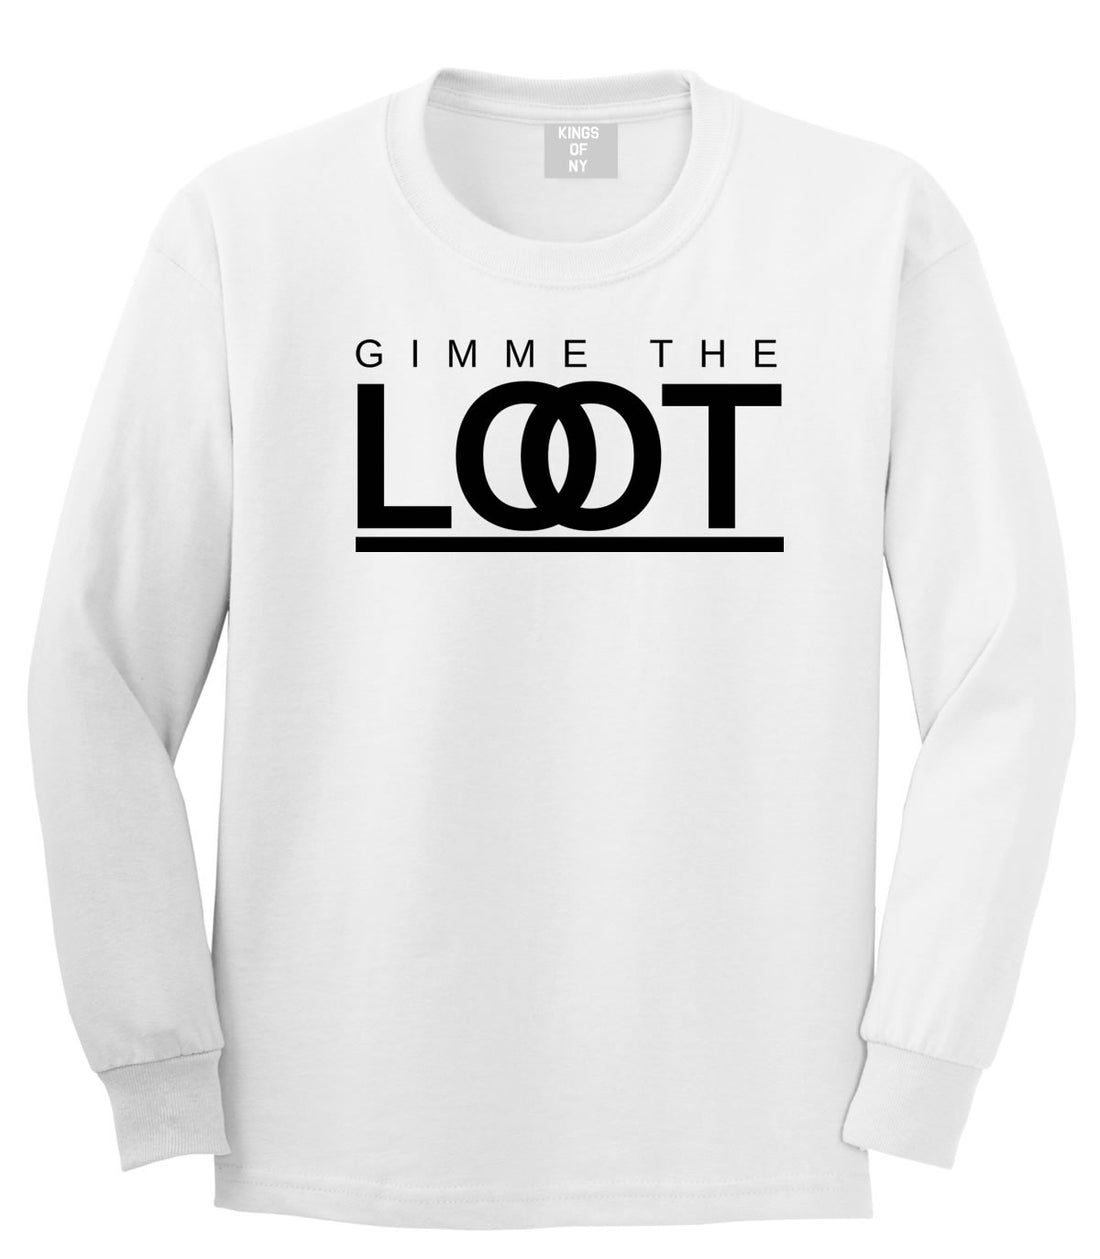 Gimme The Loot  Long Sleeve T-Shirt in White By Kings Of NY